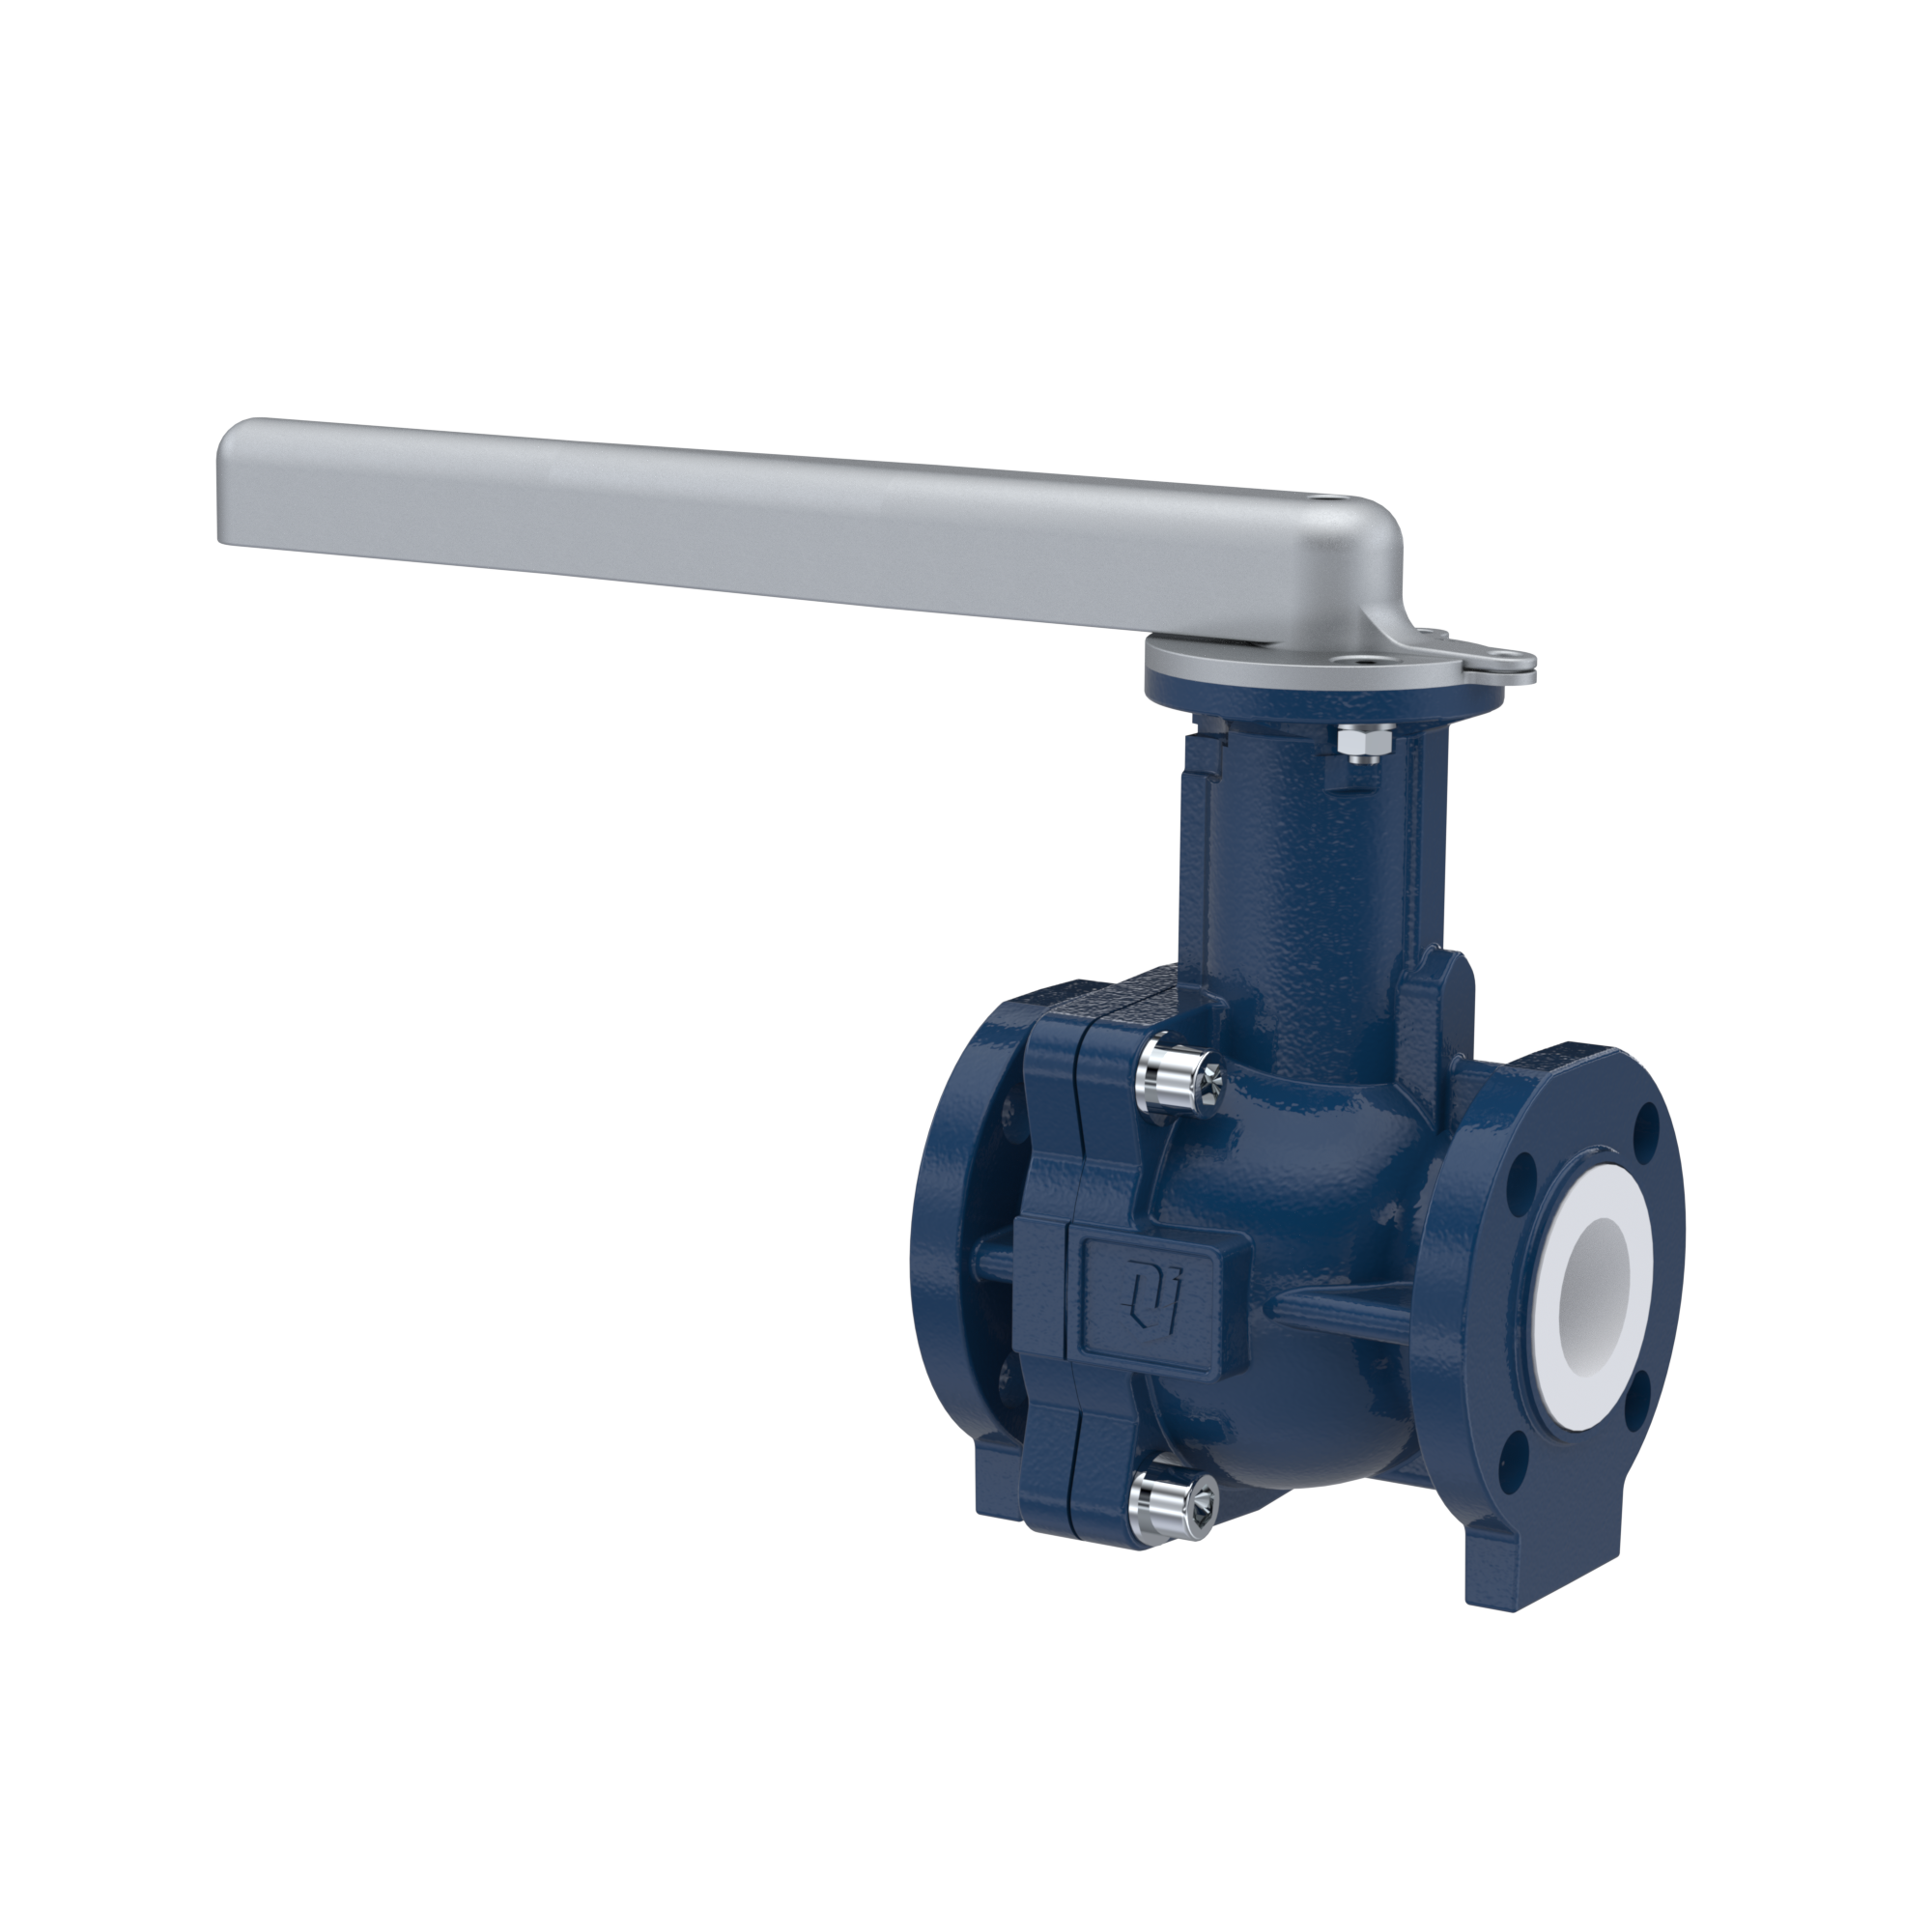 PFA-flange ball valve FK13 DN25 - 1" inch ANSI 150 made of spheroidal graphite cast iron with lever hand